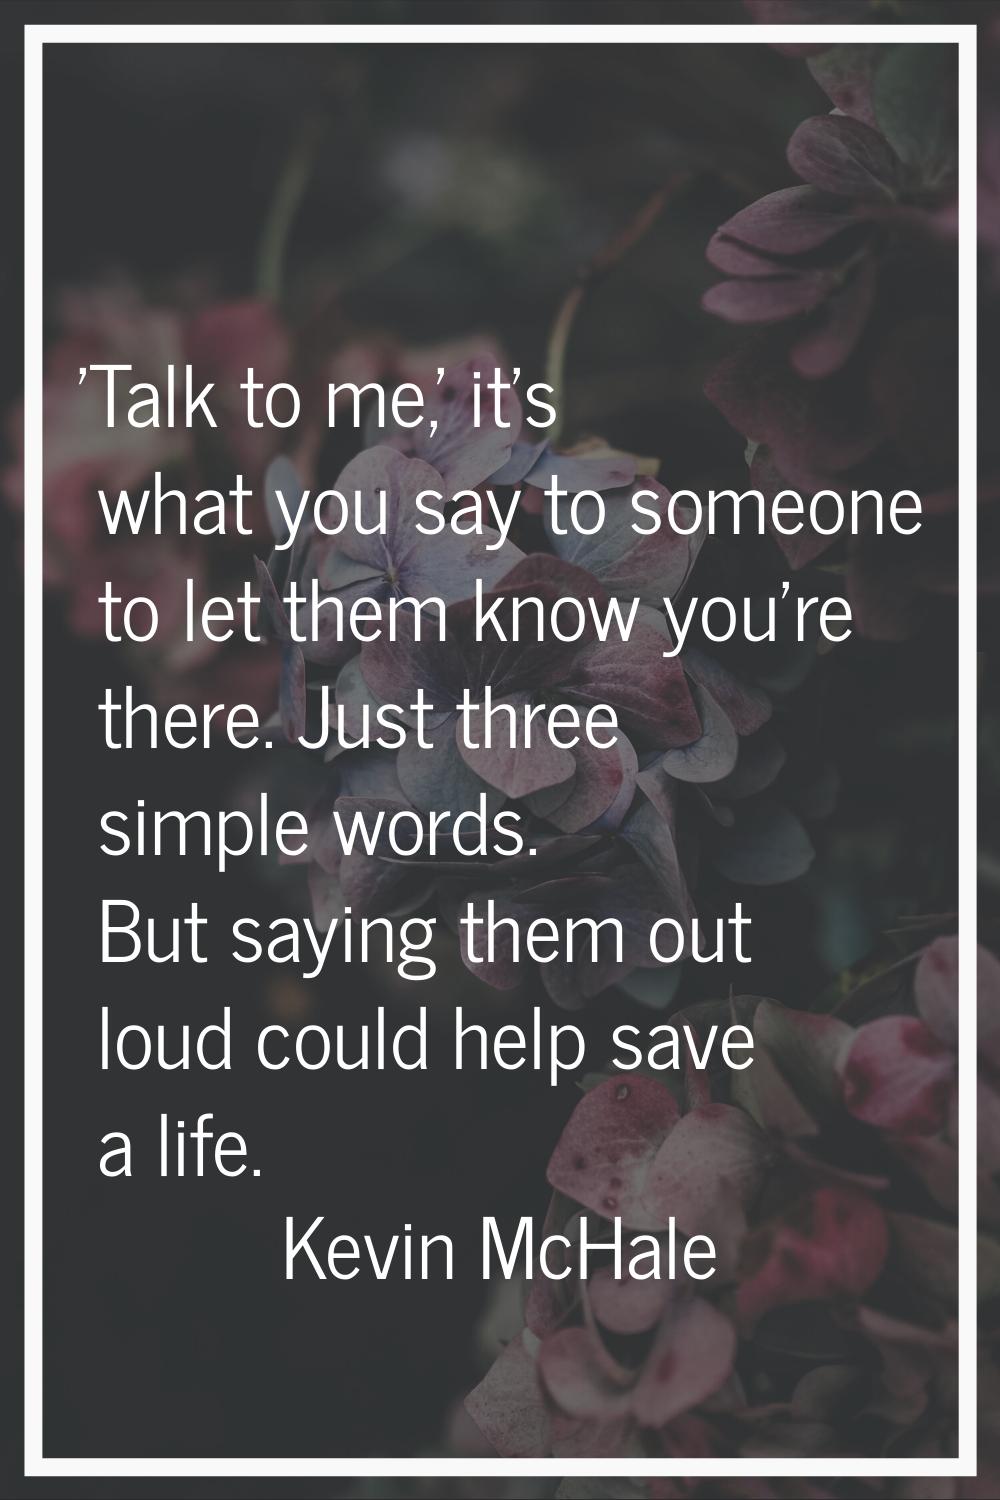 'Talk to me,' it's what you say to someone to let them know you're there. Just three simple words. 